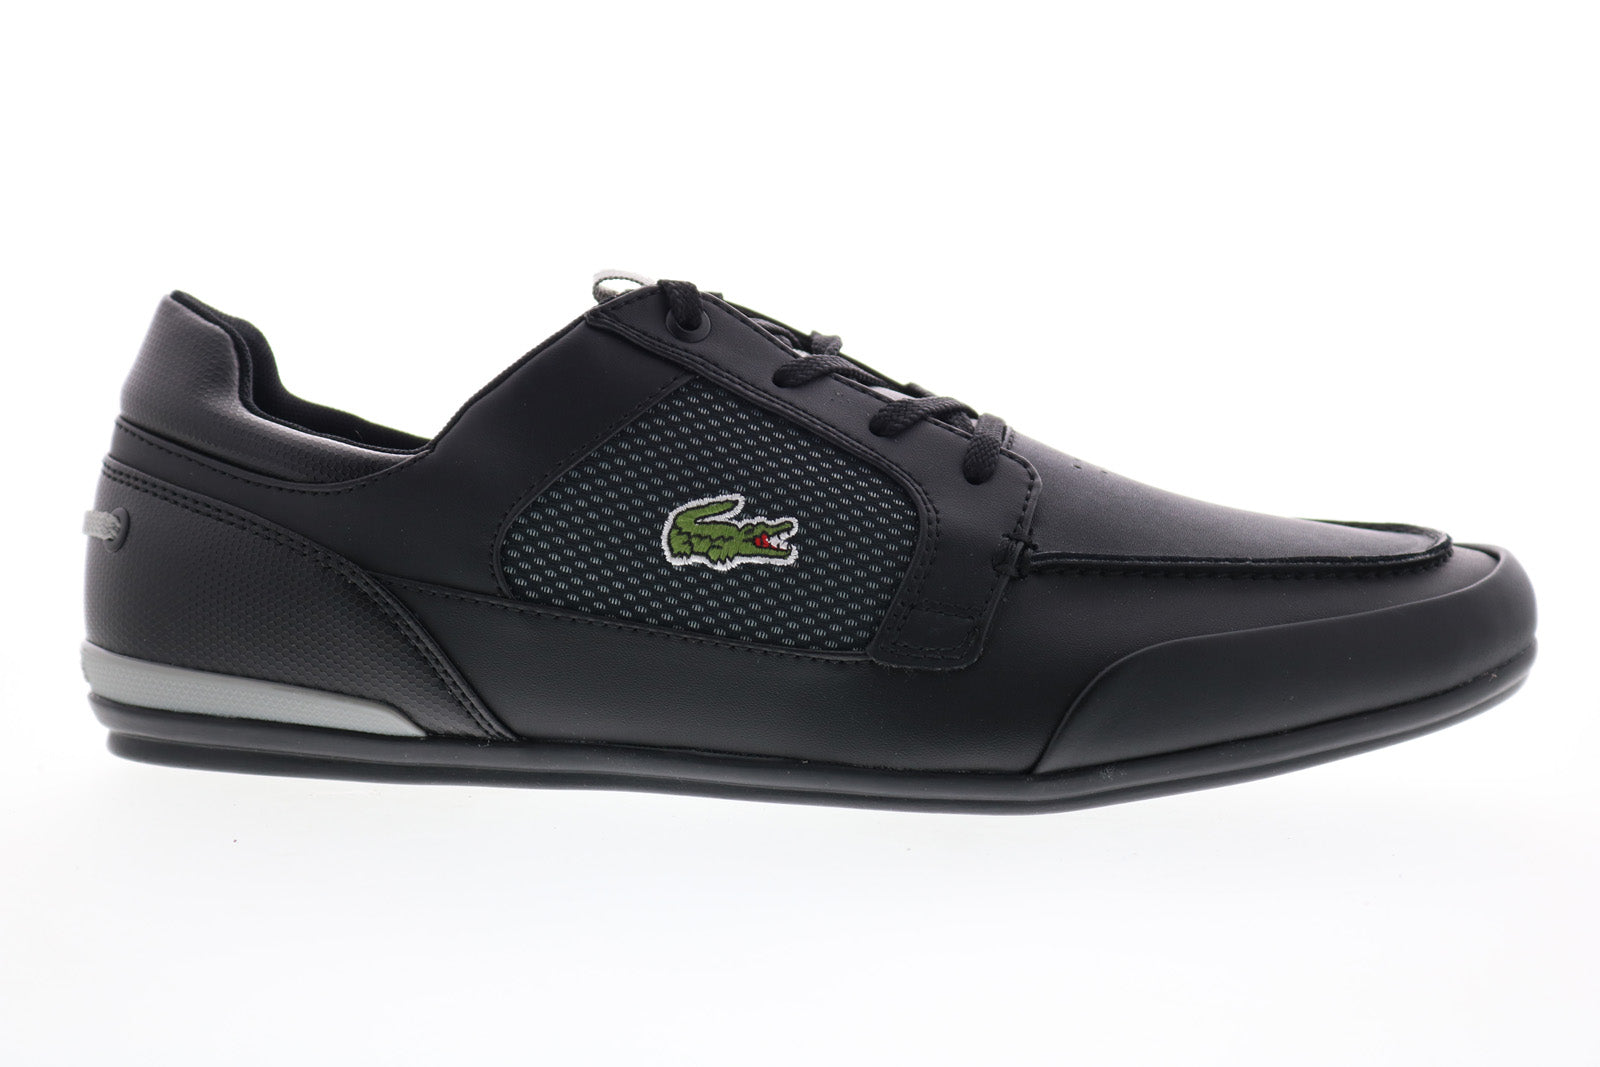 Lacoste 120 2 Cm Mens Black Leather Up Lifestyle Sneakers - Shoes